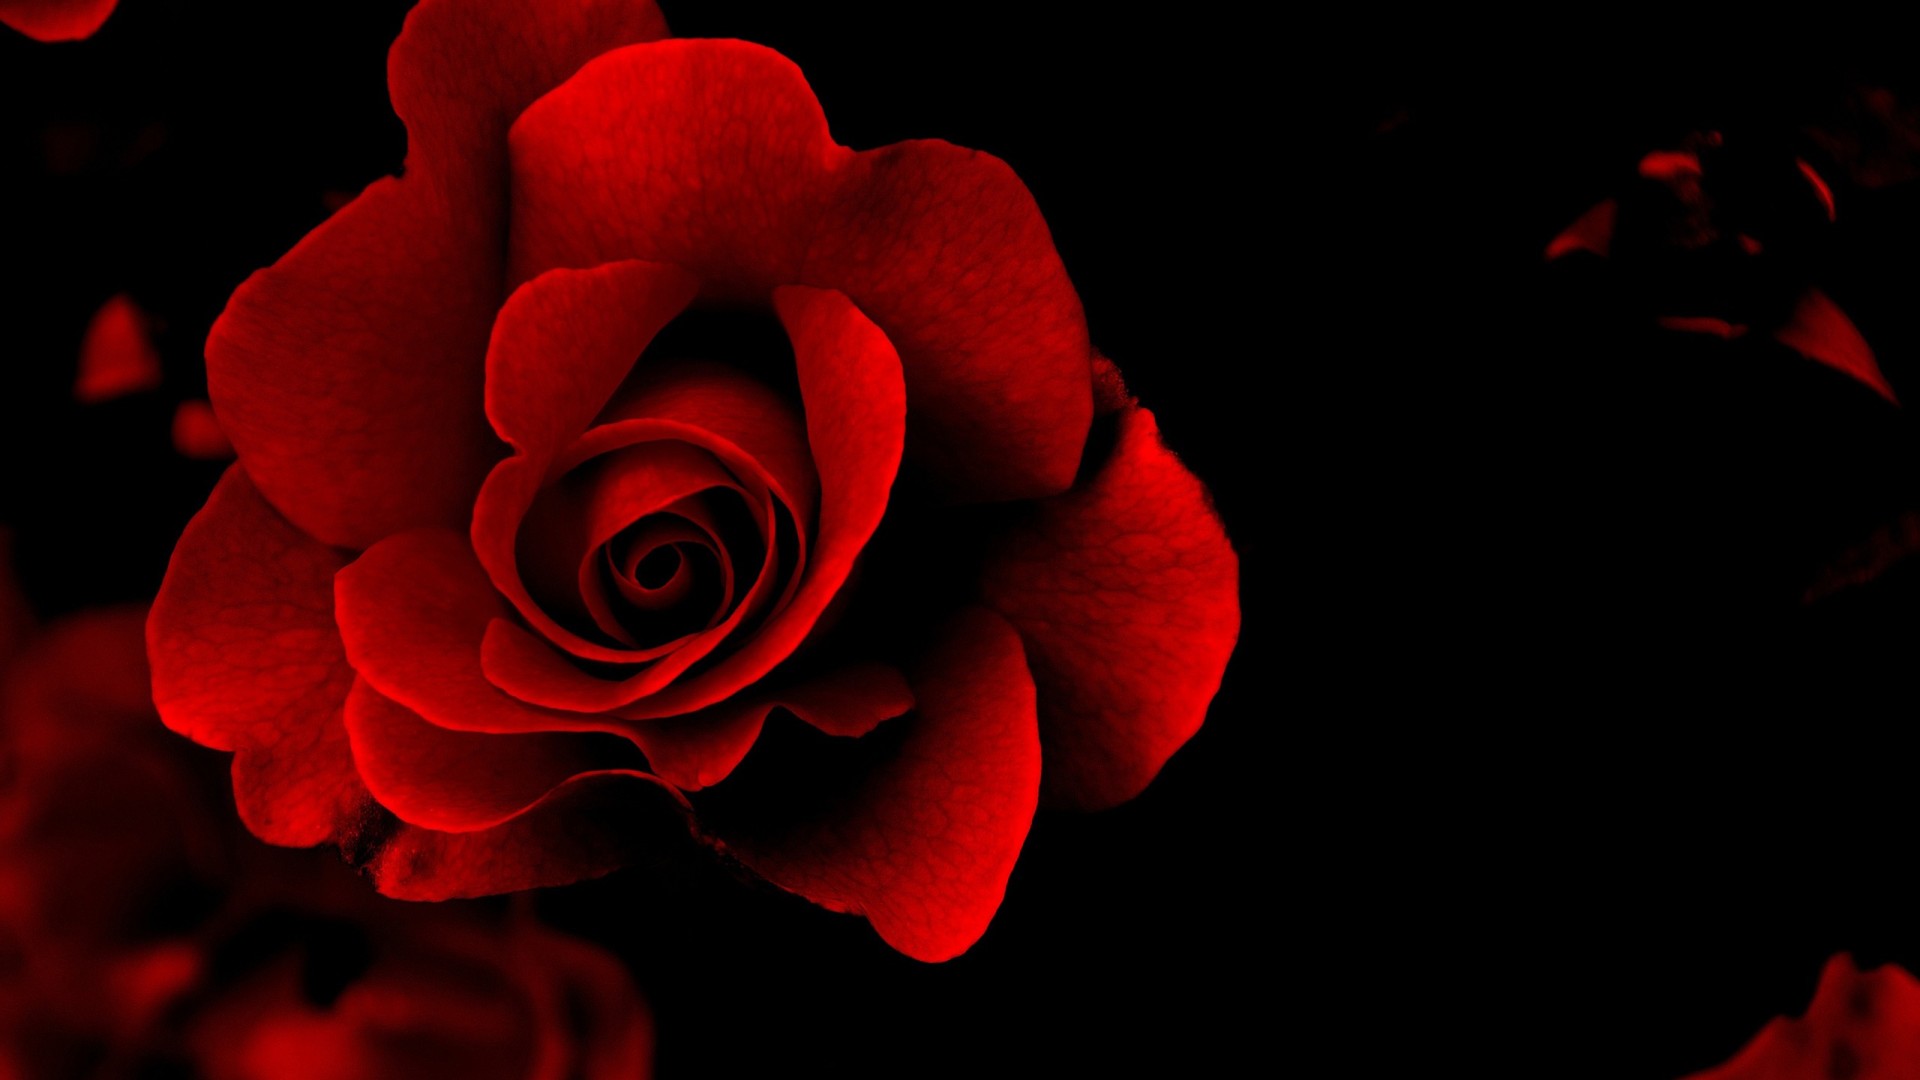 Gallery For gt Black And Red Roses Wallpaper